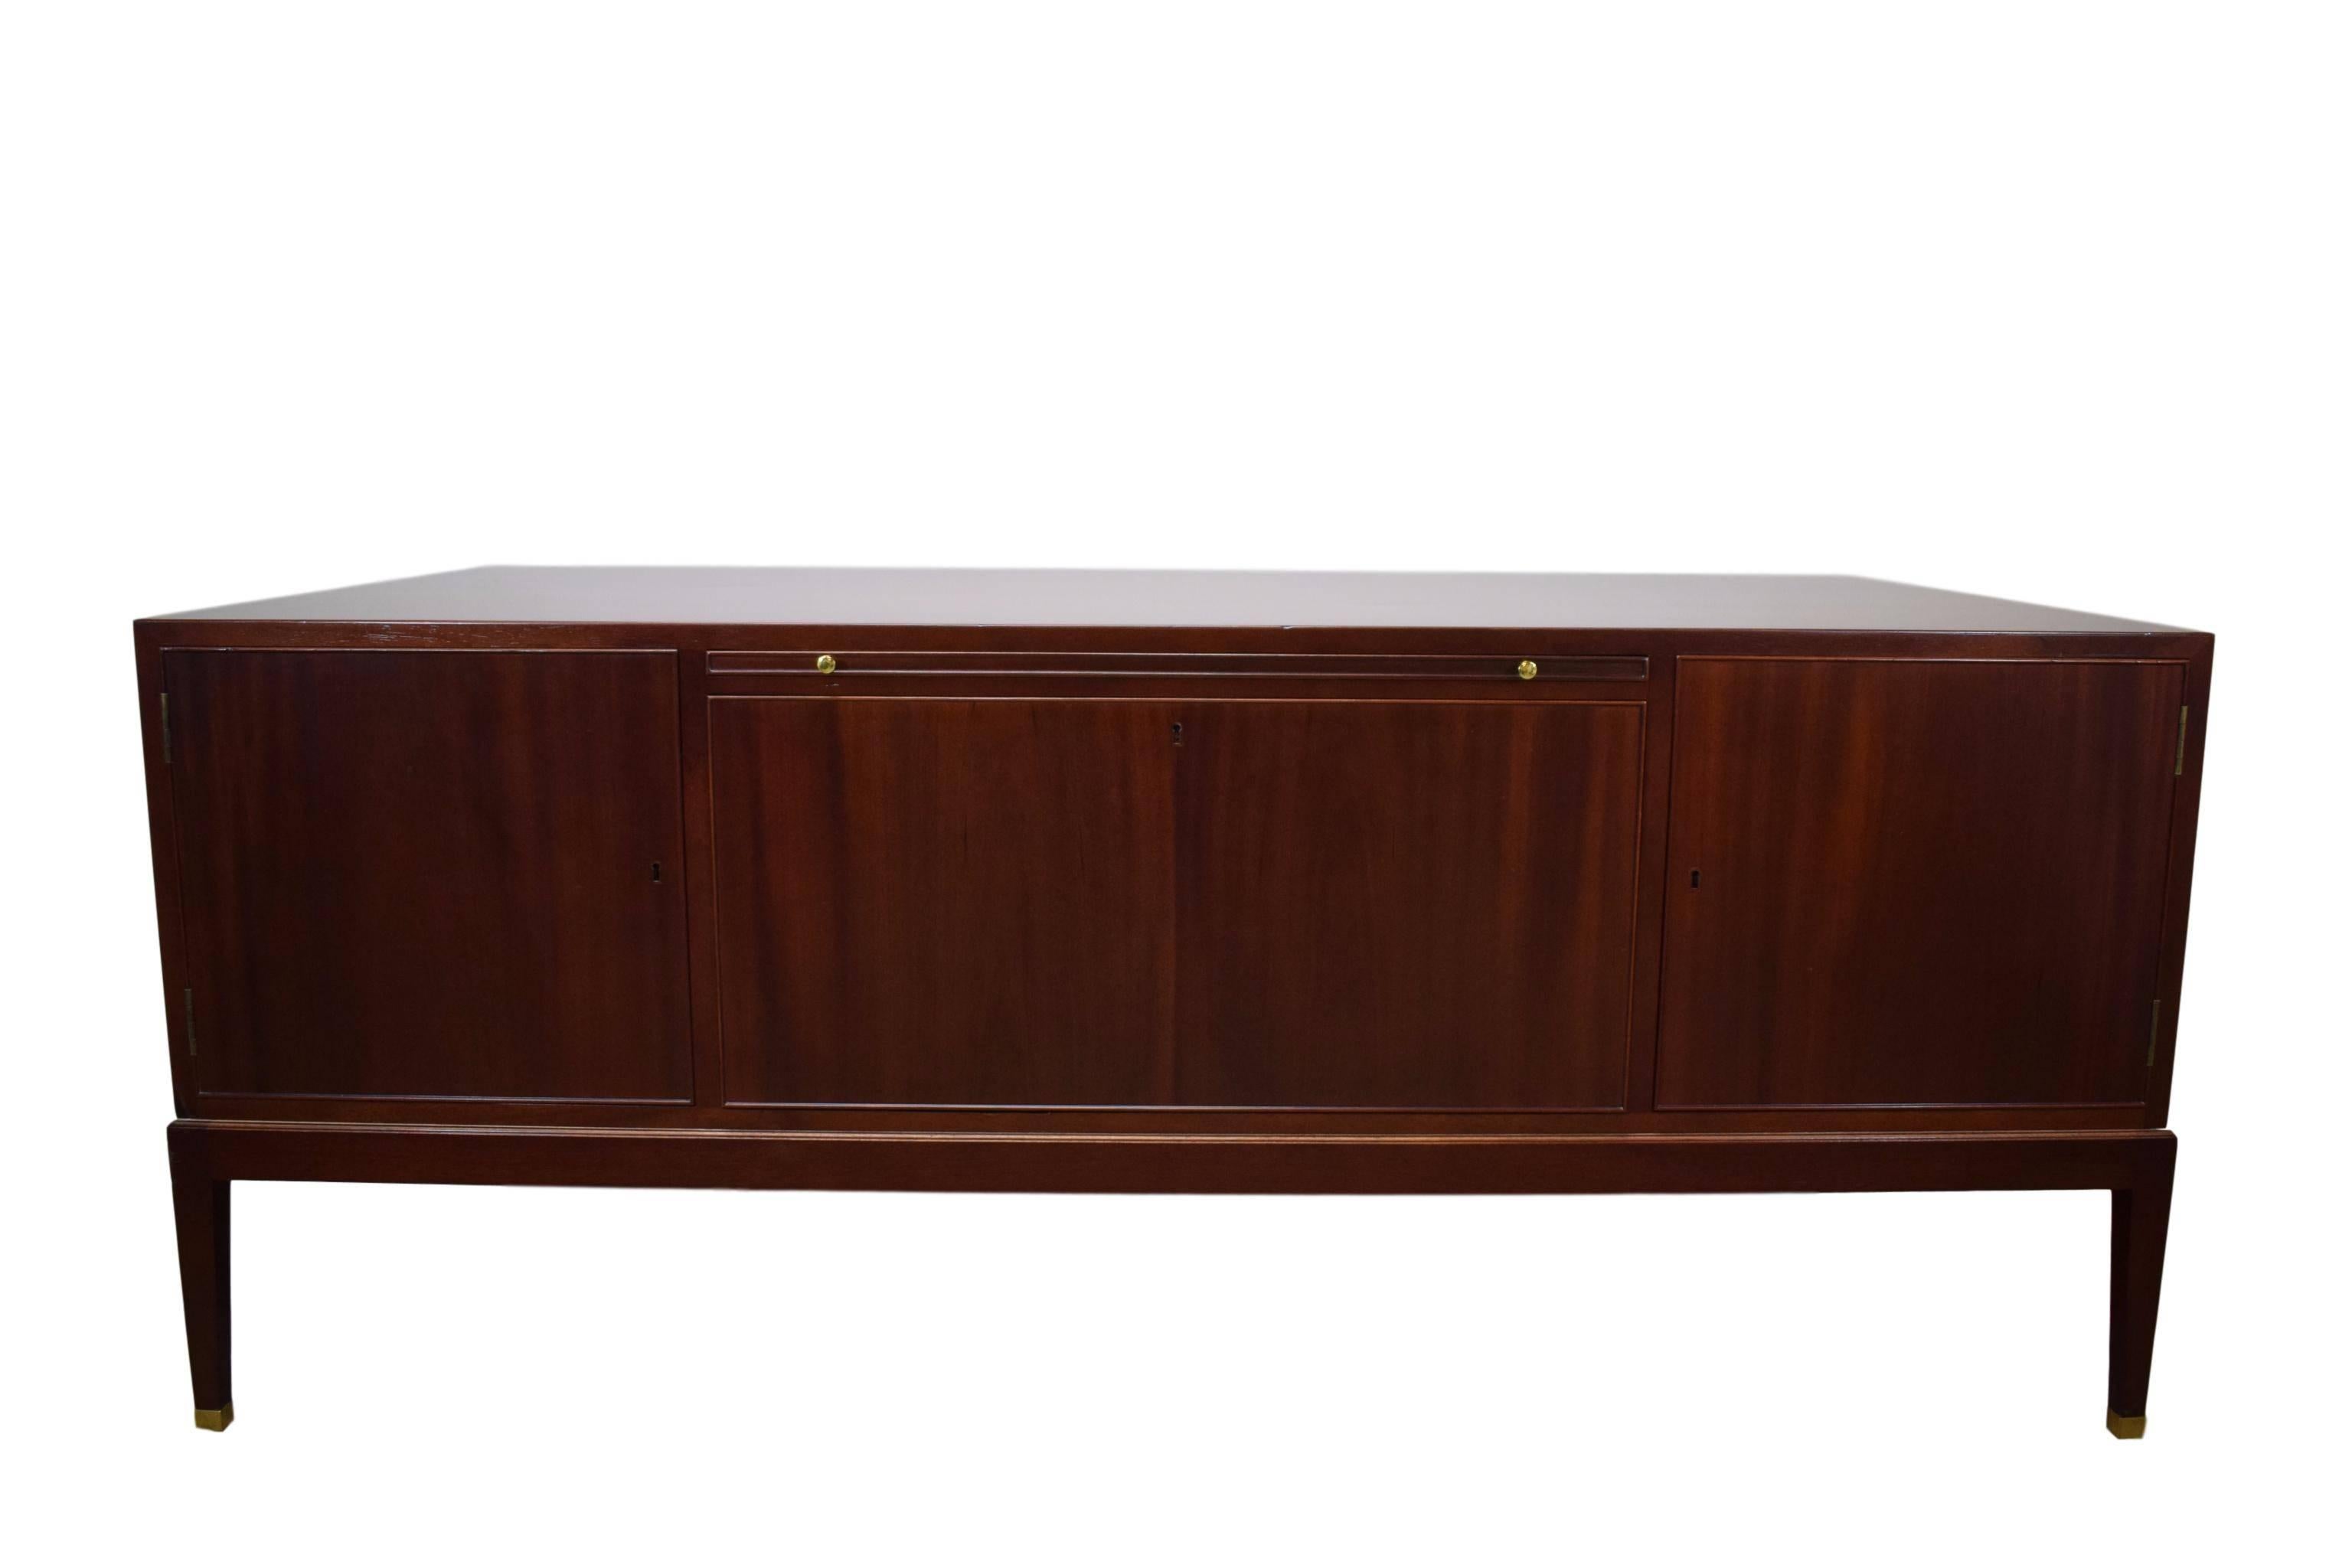 A Danish midcentury desk in mahogany. With ten drawers on the front and three cabinets plus on pull-out tablet on the rear. Bras handles and shoes. Produced on Philips Fabrik. Plate with the text 